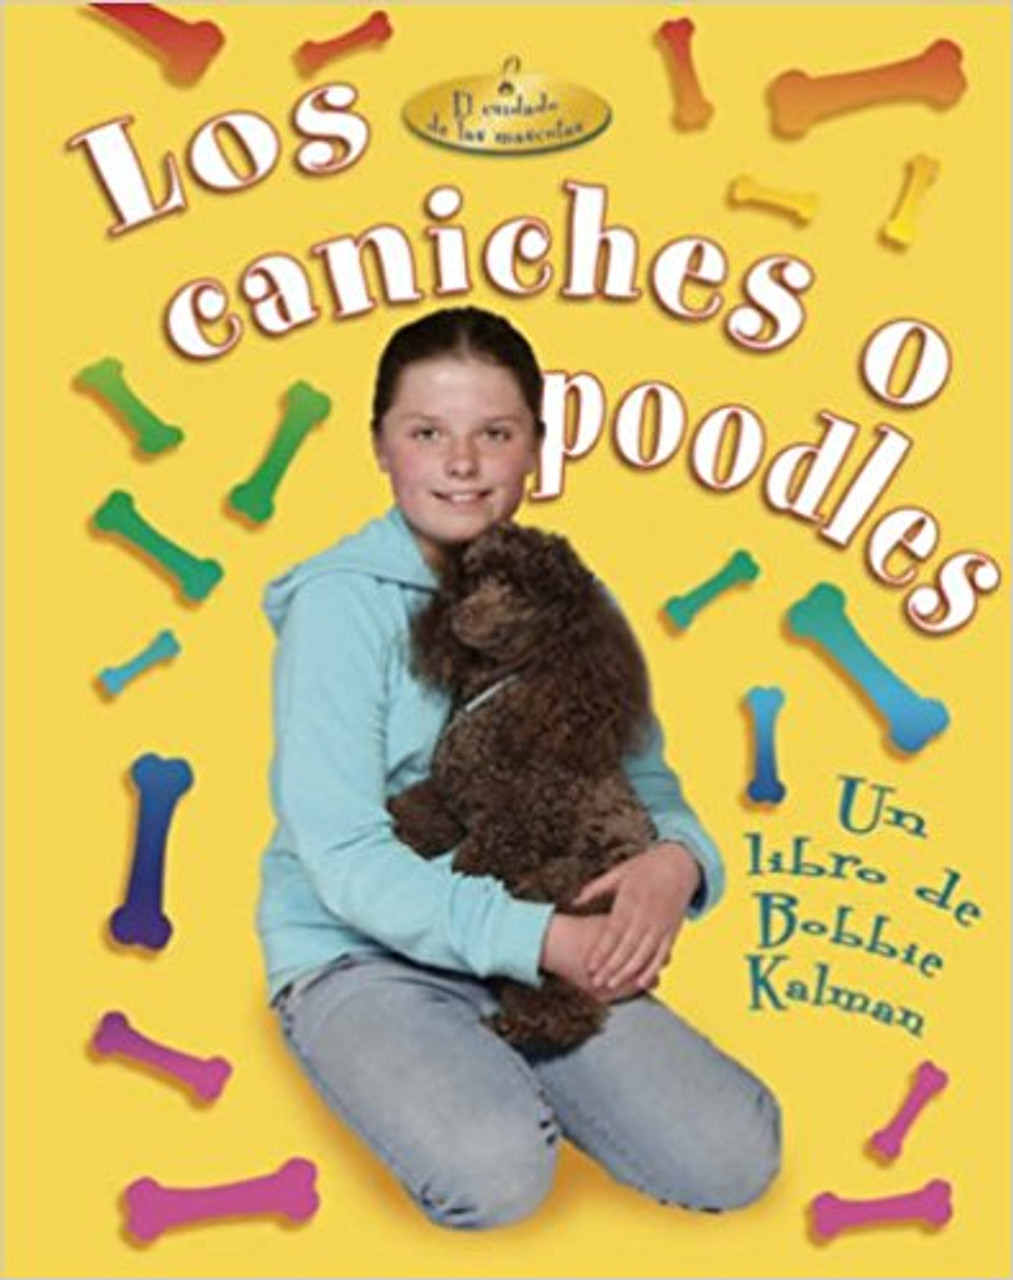 Los Caniches o Poodles by Kelley MacAulay